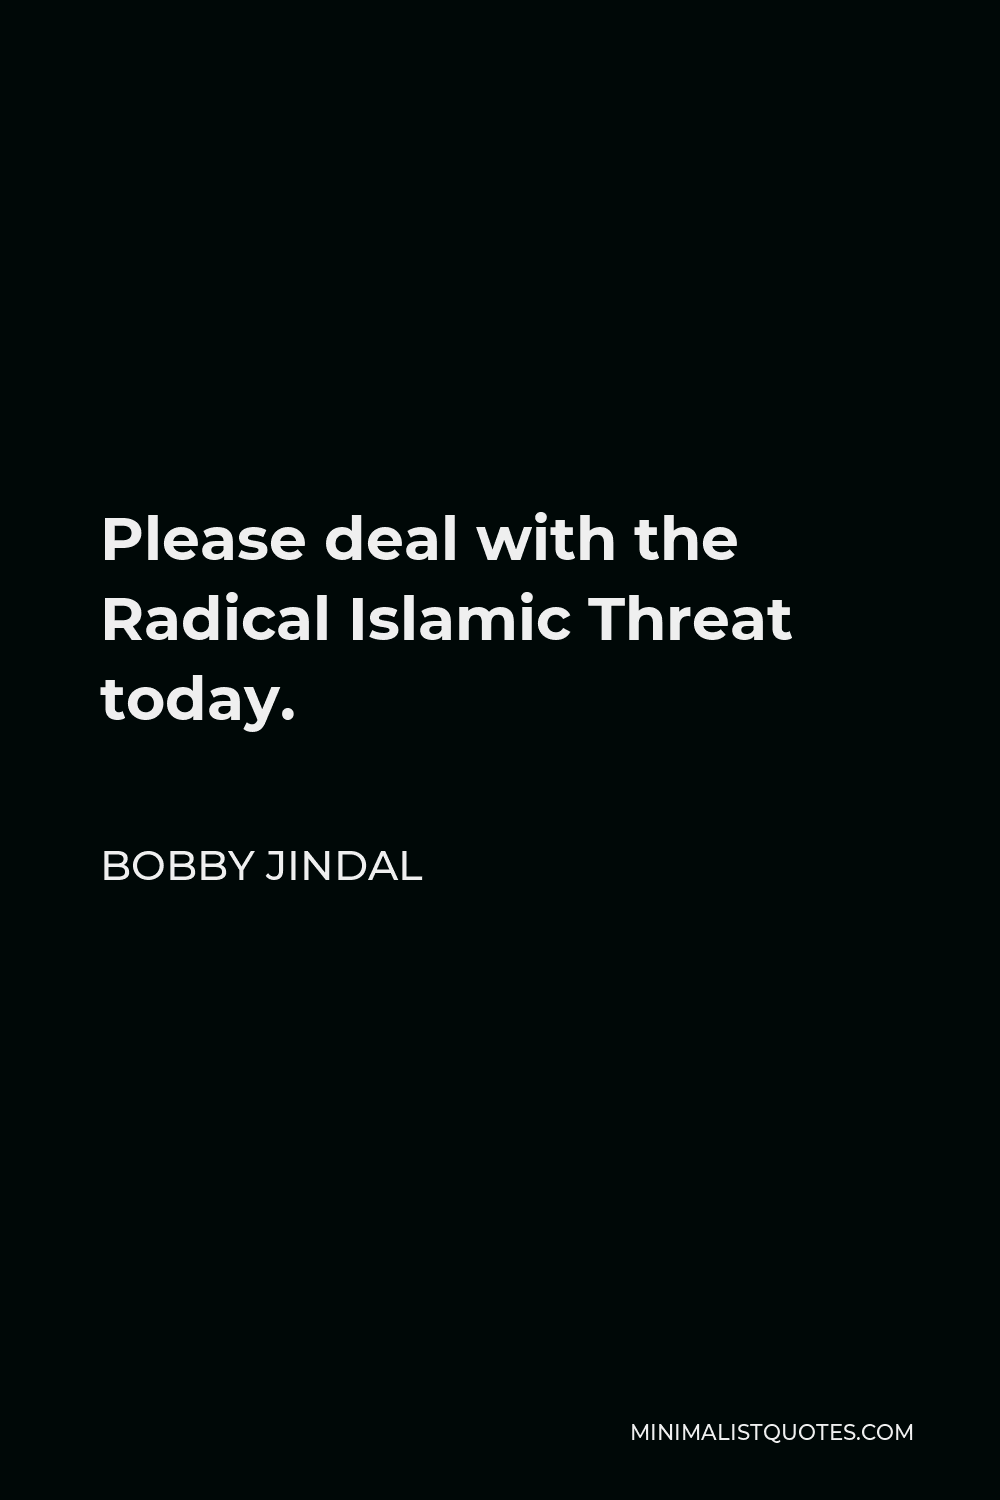 Bobby Jindal Quote - Please deal with the Radical Islamic Threat today.